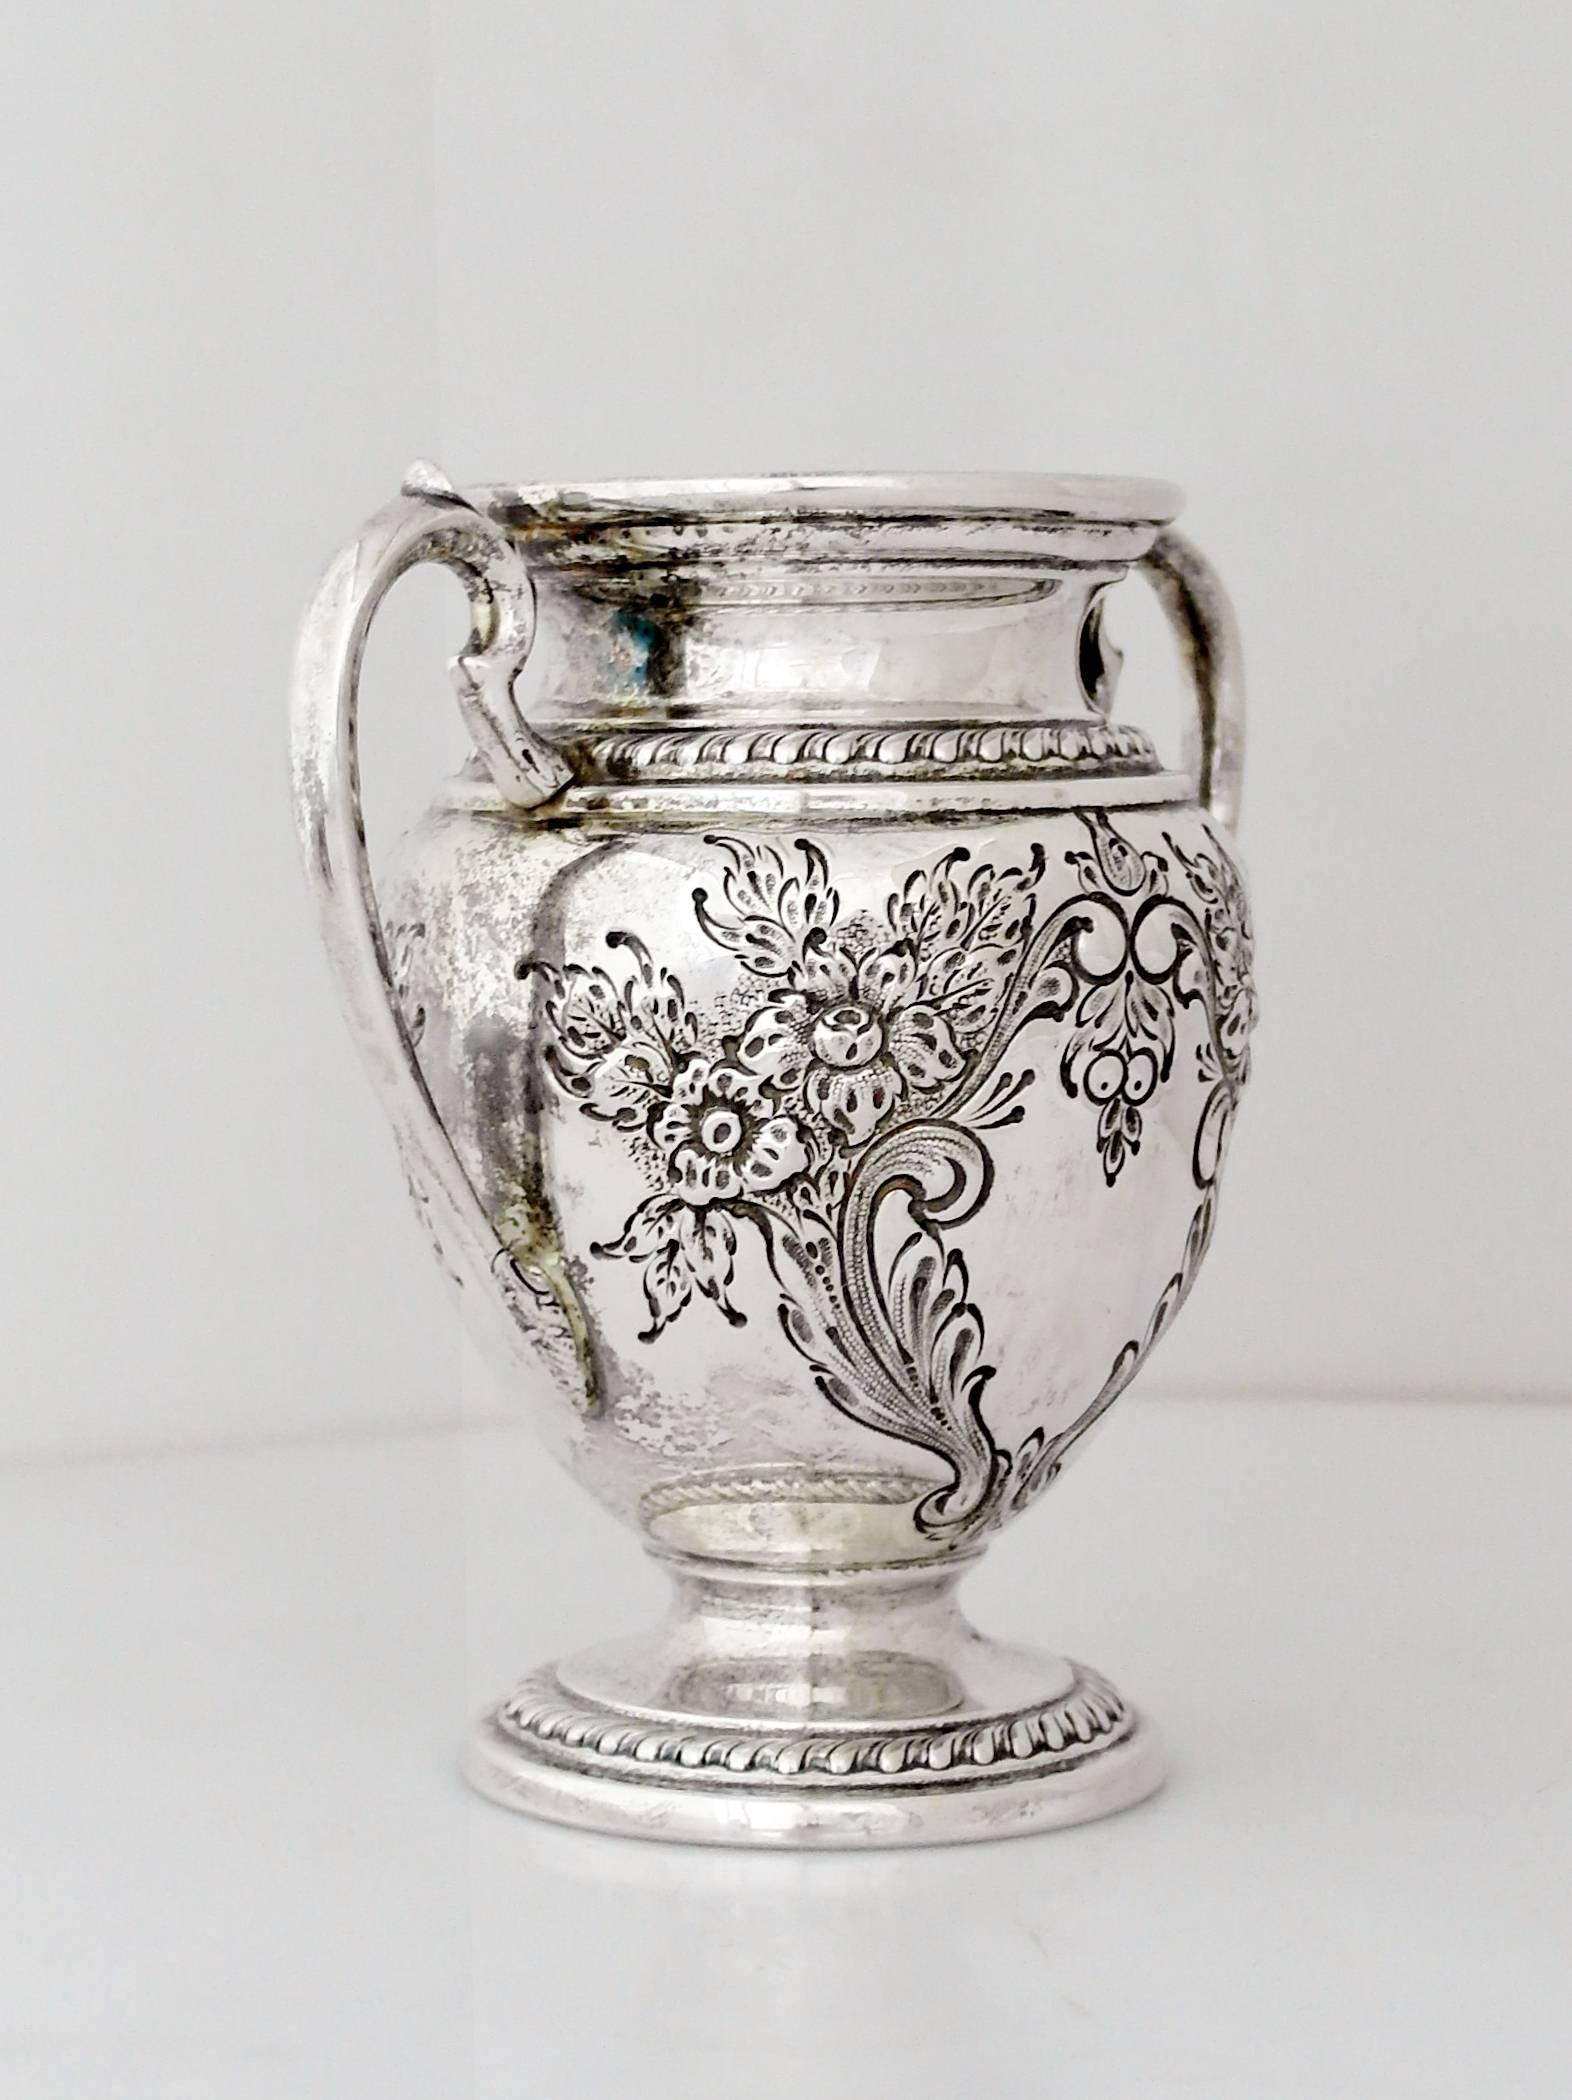 Being offered is a fine, circa 1950 sterling silver vase by Ellmore Silver Co. of Meriden, Connecticut. Urn form with hand chased scrolls and foliate, decorated with two curved handles; resting on a stepped, gadrooned base. Weight 13 ozs.